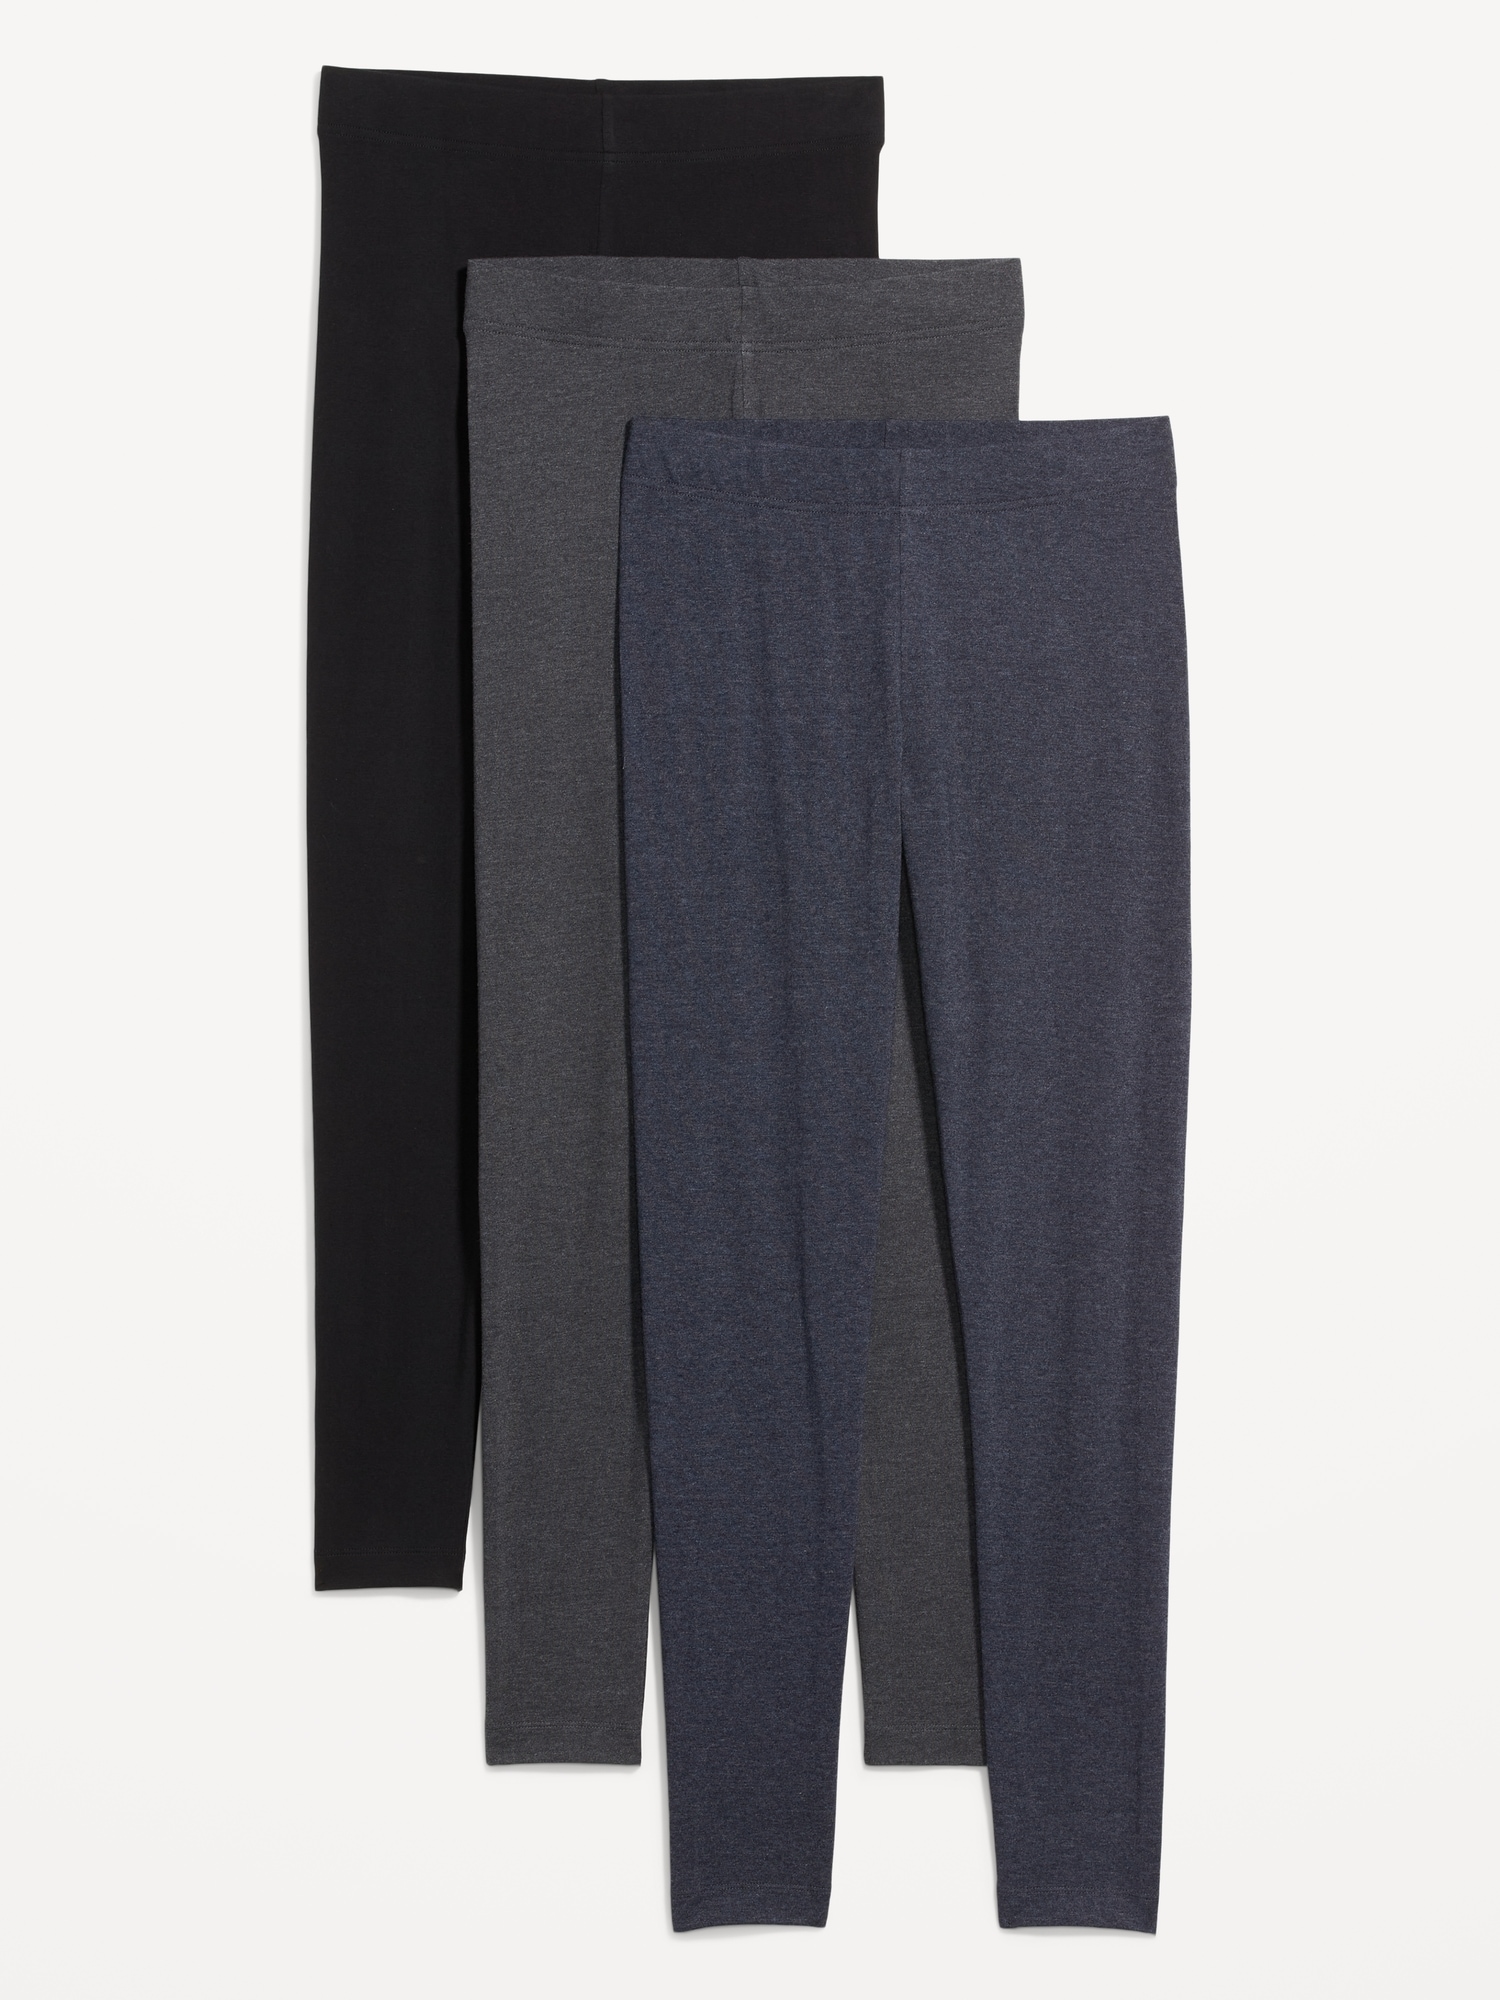 3/$30 Old Navy Active leggings 21” crop - navy blue with black stripe size M